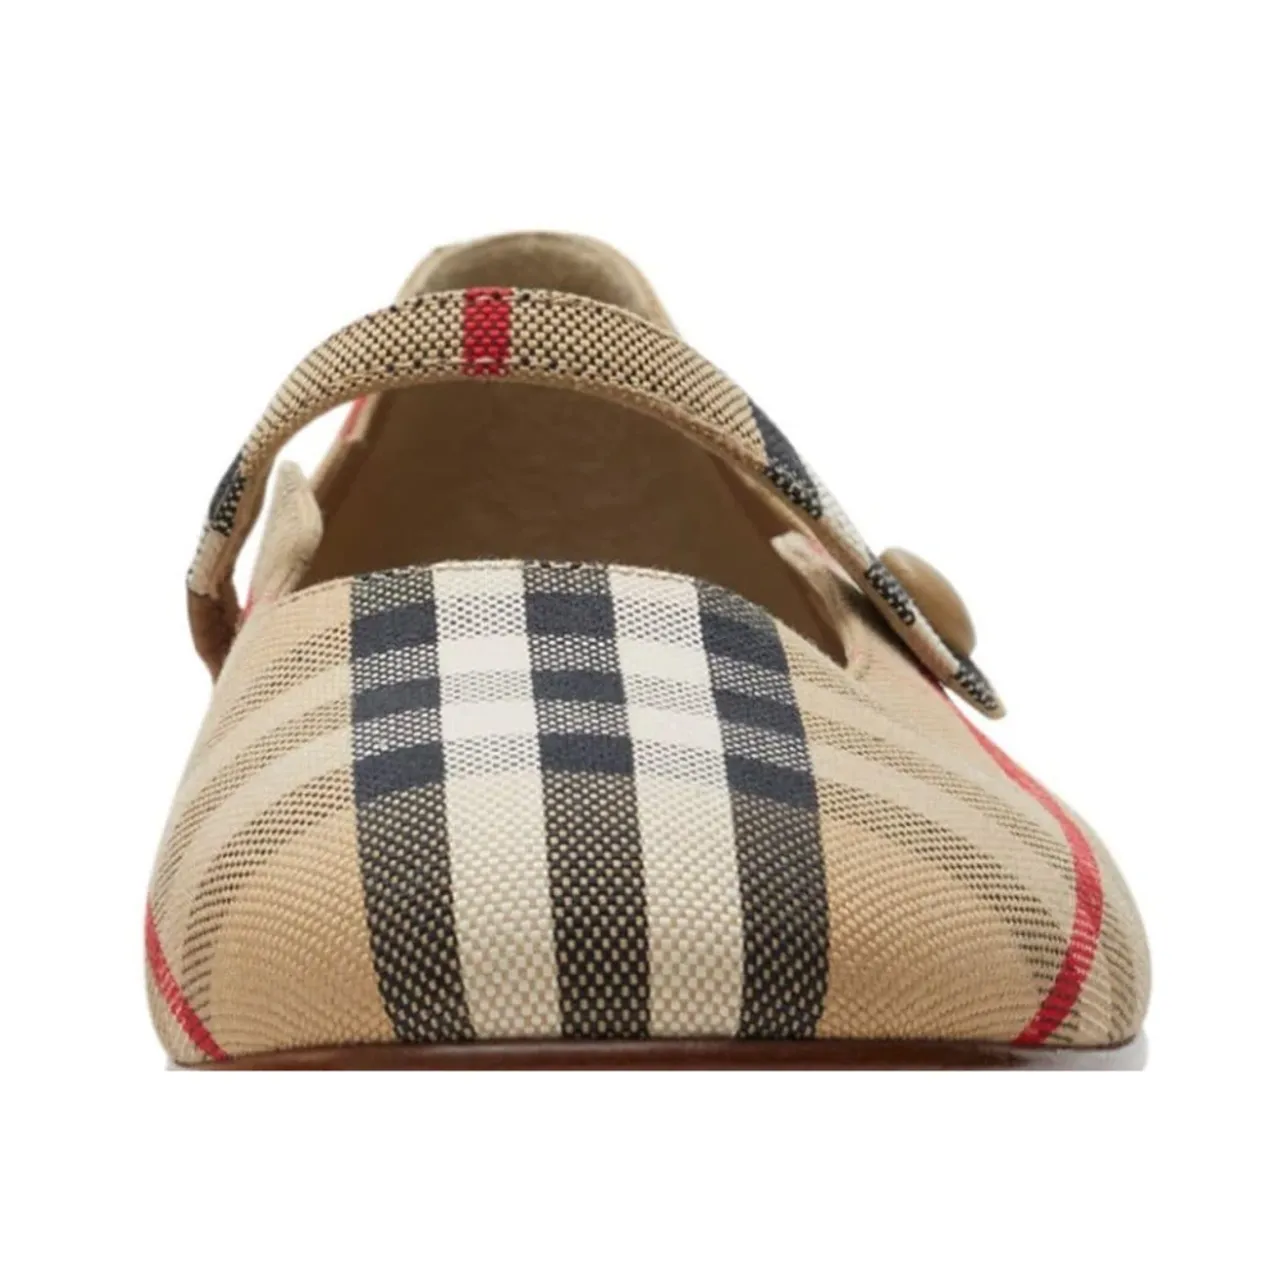 Burberry , Kids Flat Shoes in Beige ,Multicolor female, Sizes: